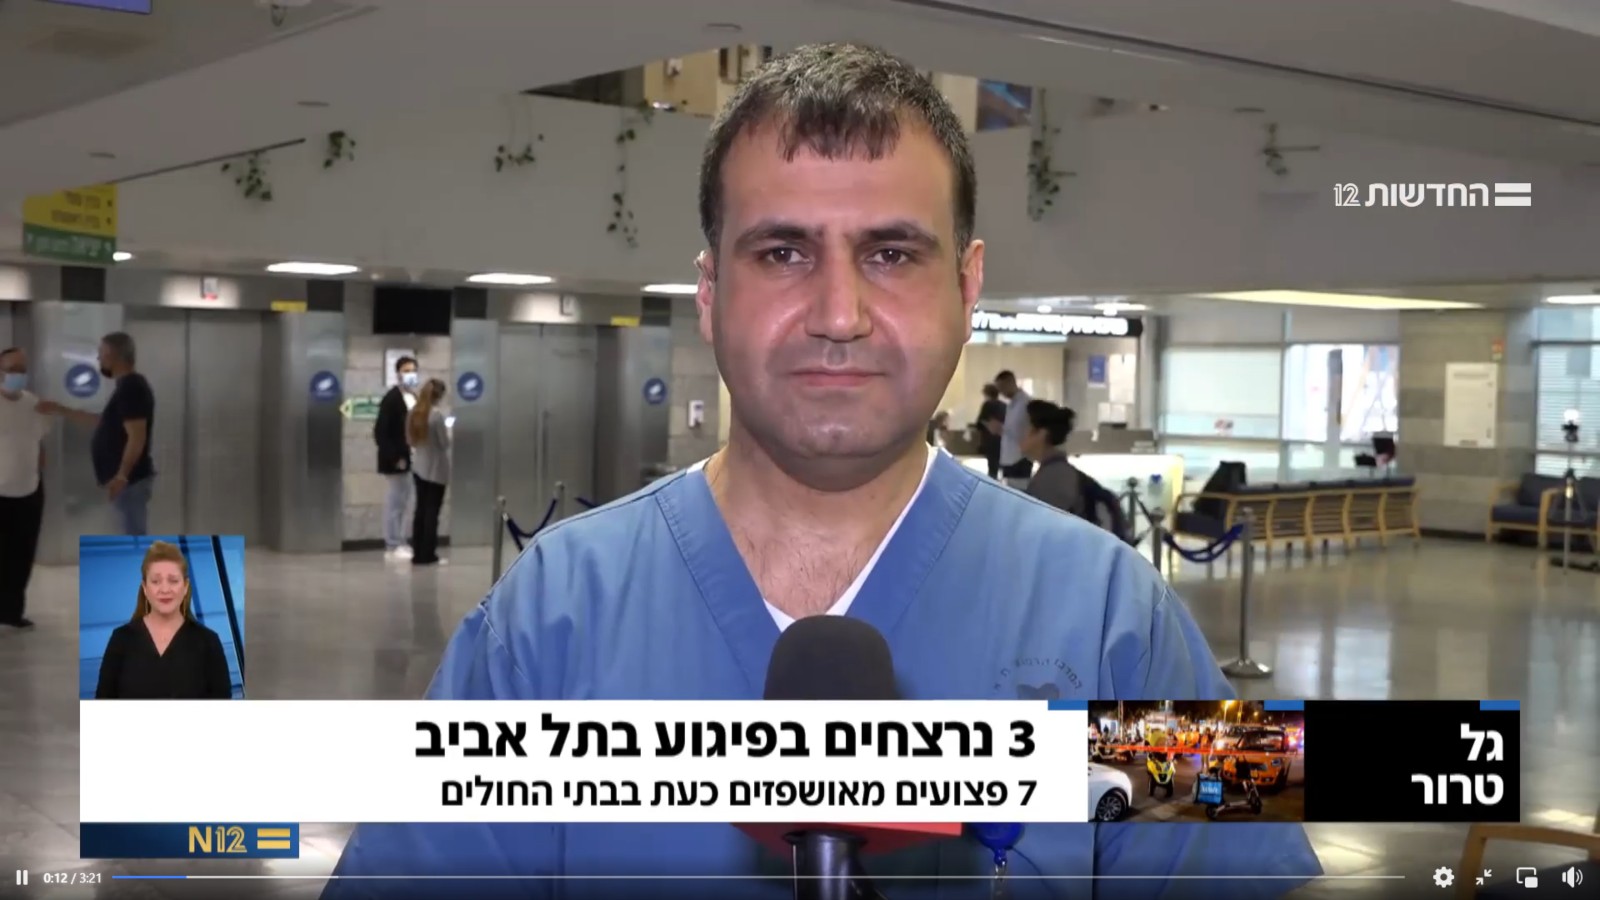 Dr. Nidal Muhanna speaking to a news anchor at Channel 12 in Israel about the deadly attacks. (Channel 12)